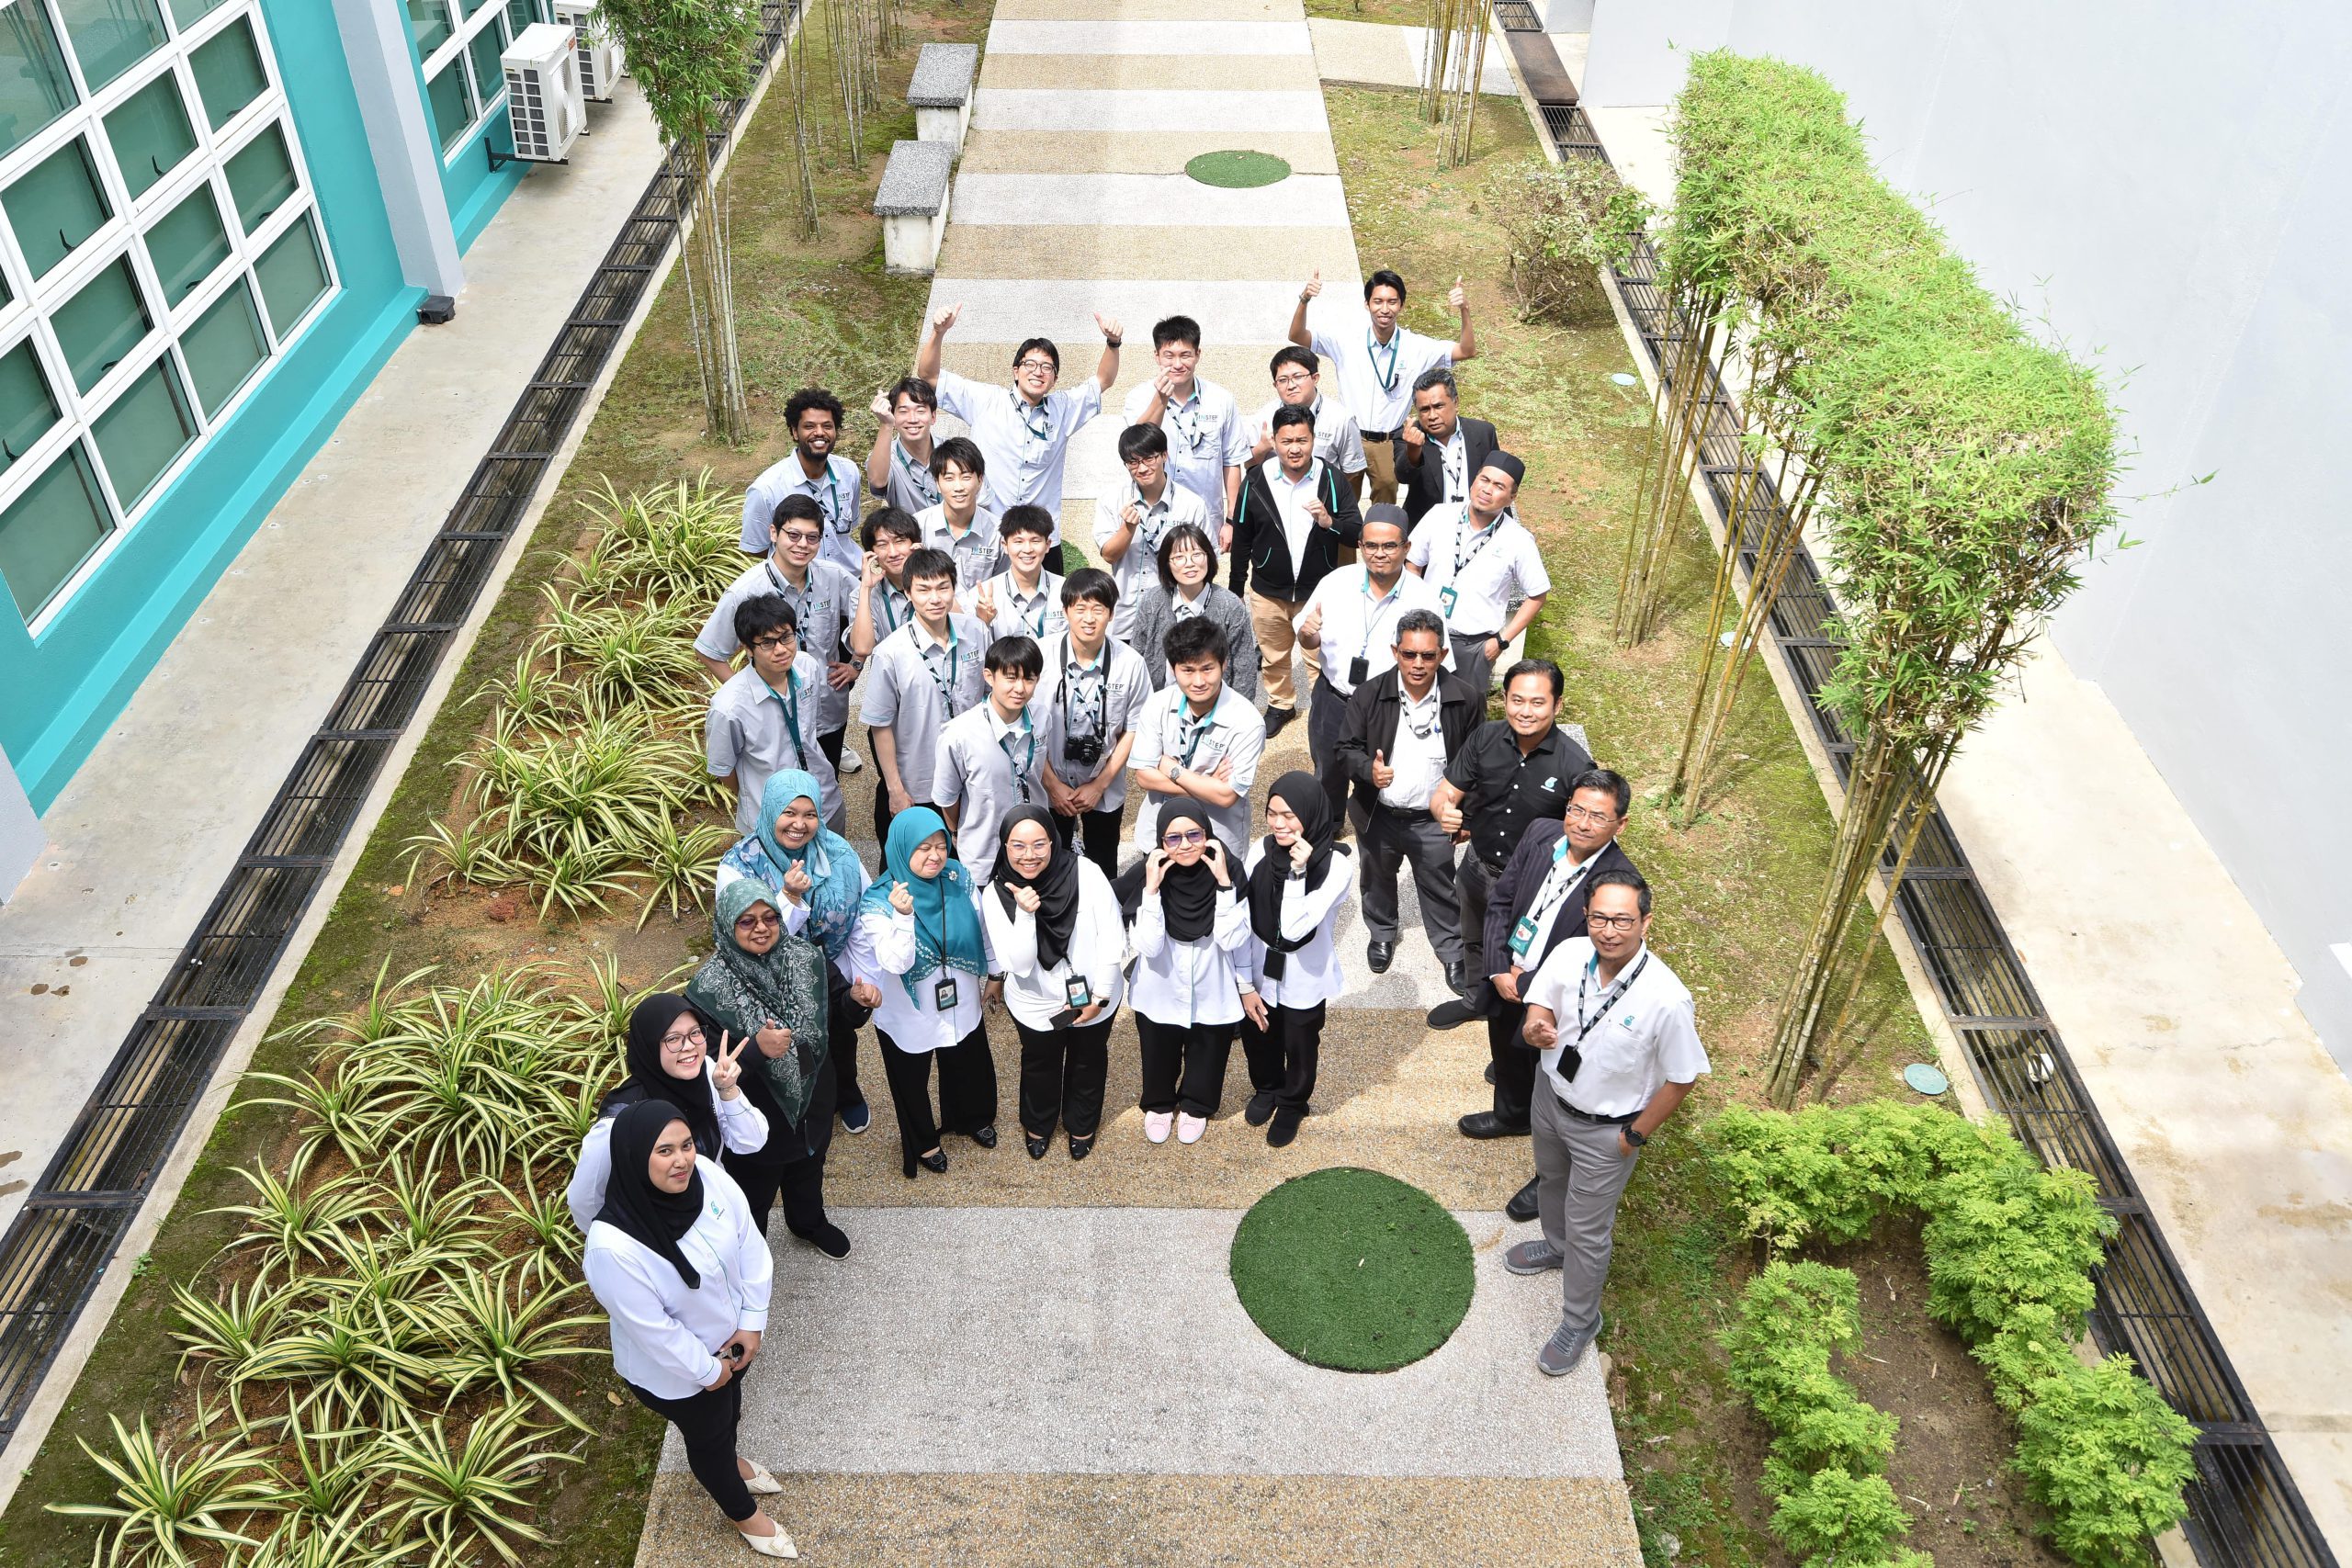 Safety Beyond Borders: INSTEP Welcomes 16 INPEX Trainees for HSE-OJT Training Programme